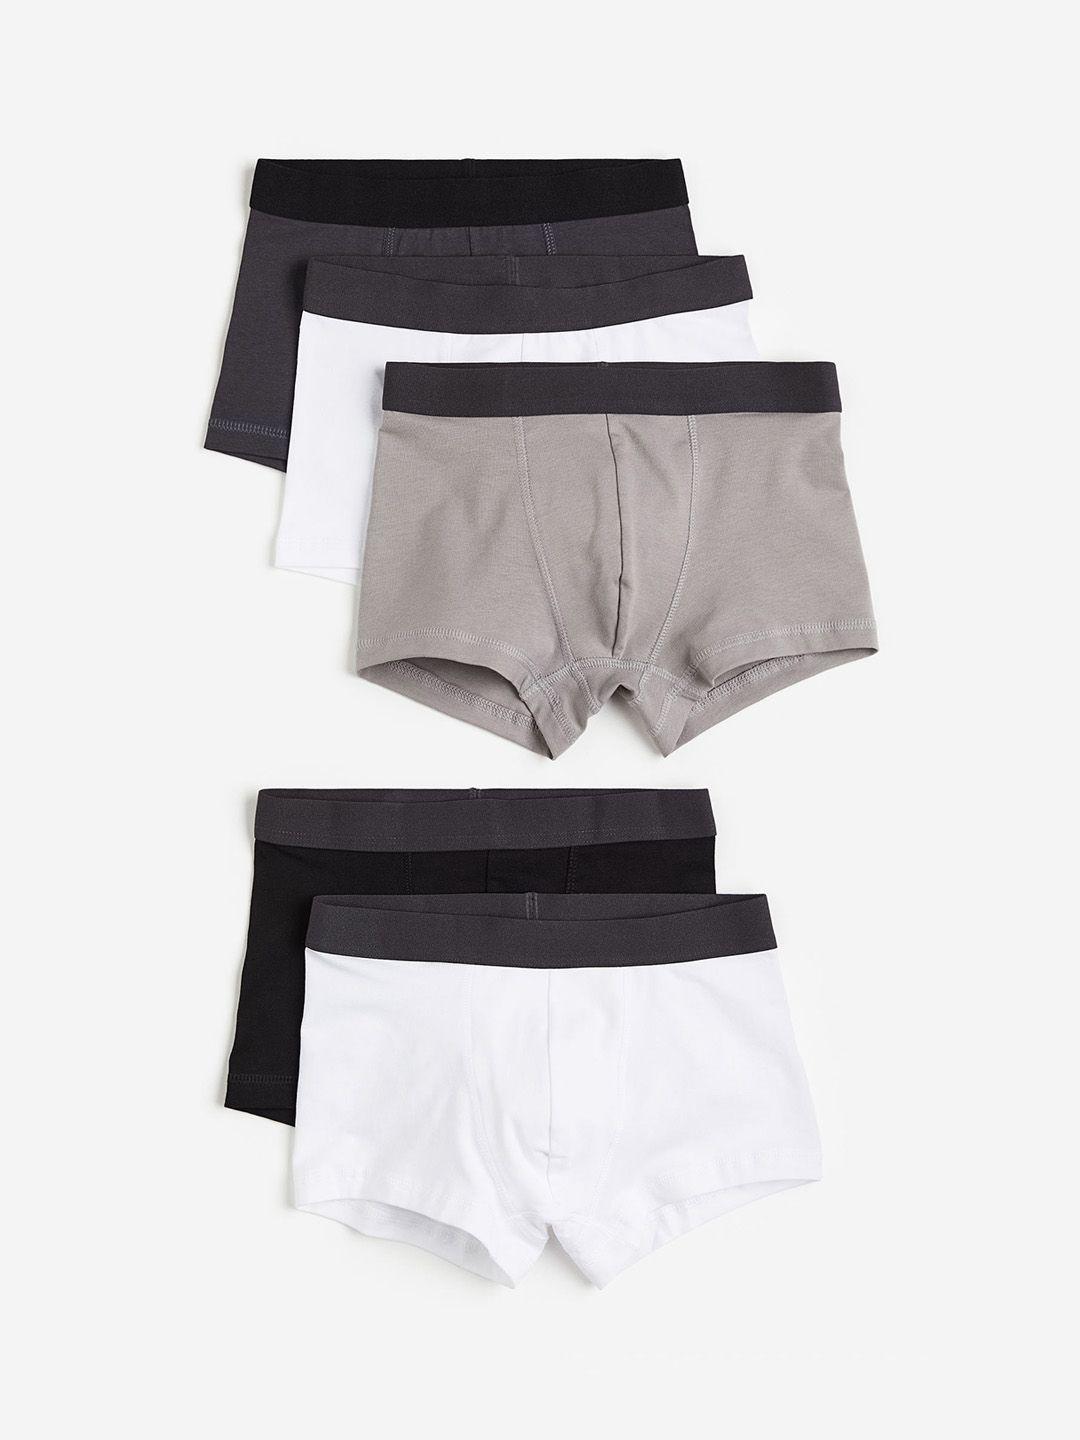 h&m boys pack of 5 boxer shorts briefs